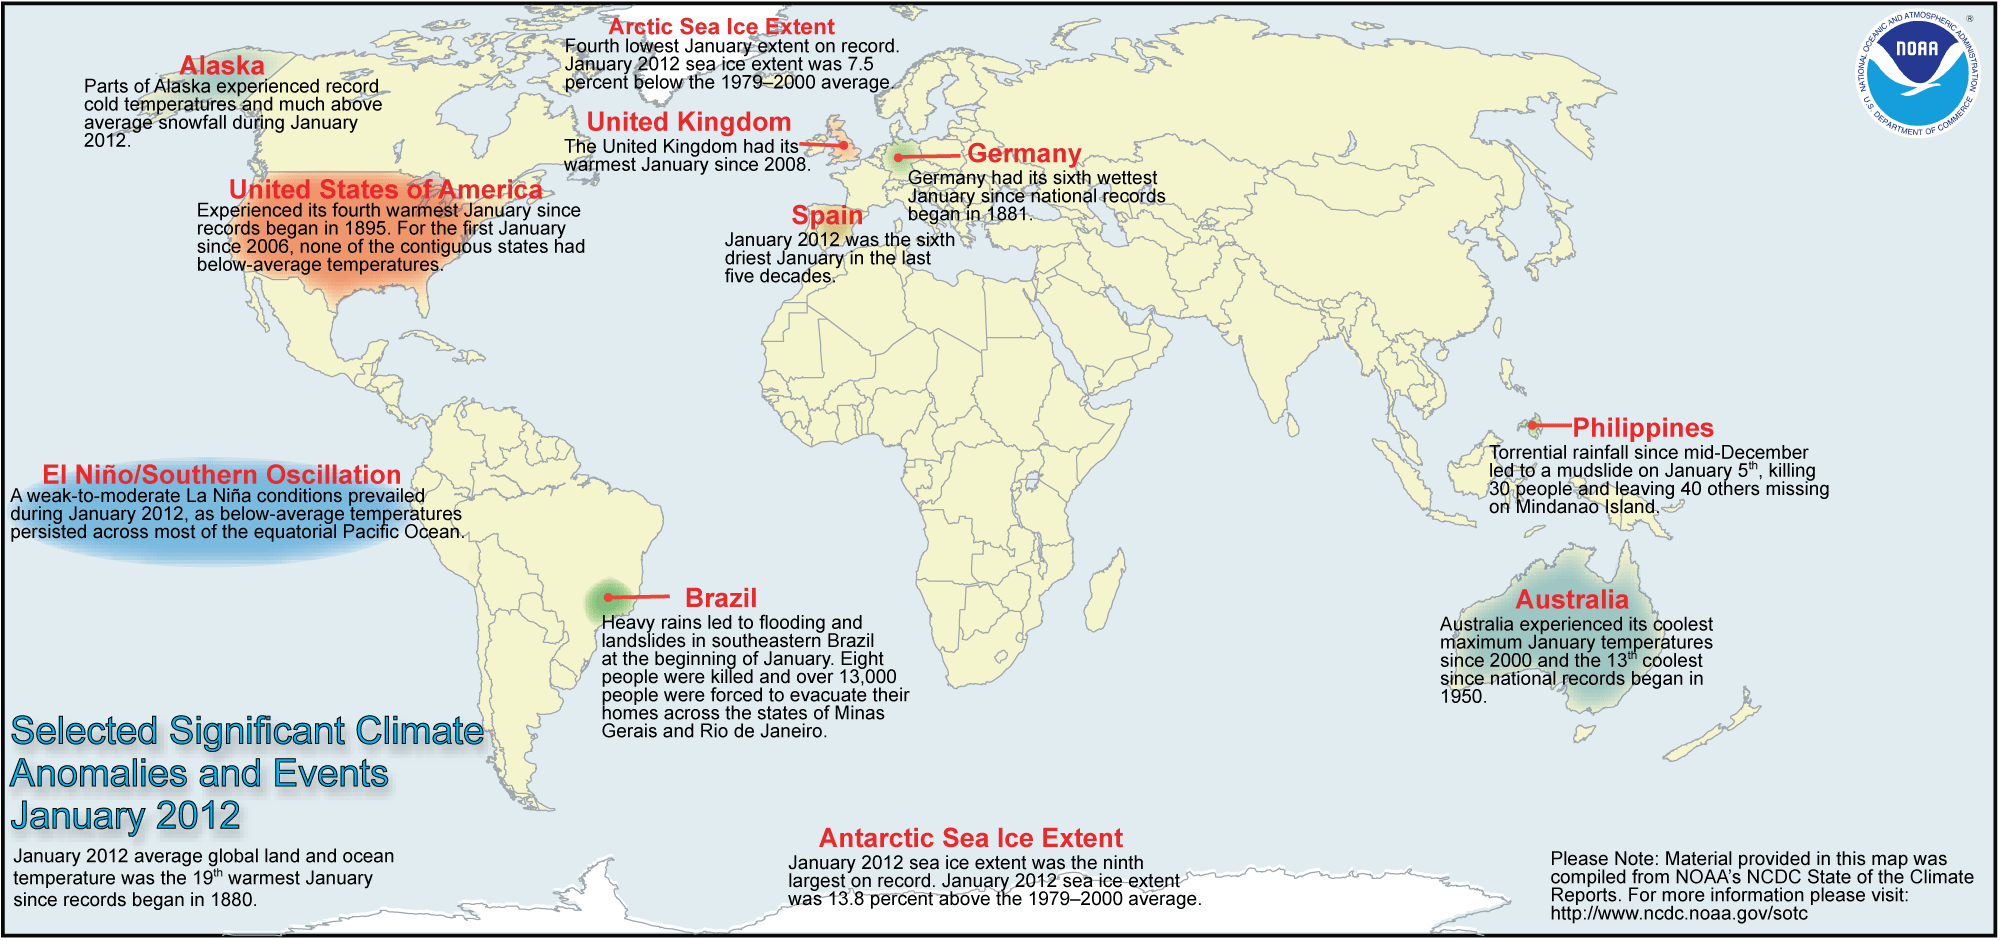 Selected Climate Anomalies and Events Map